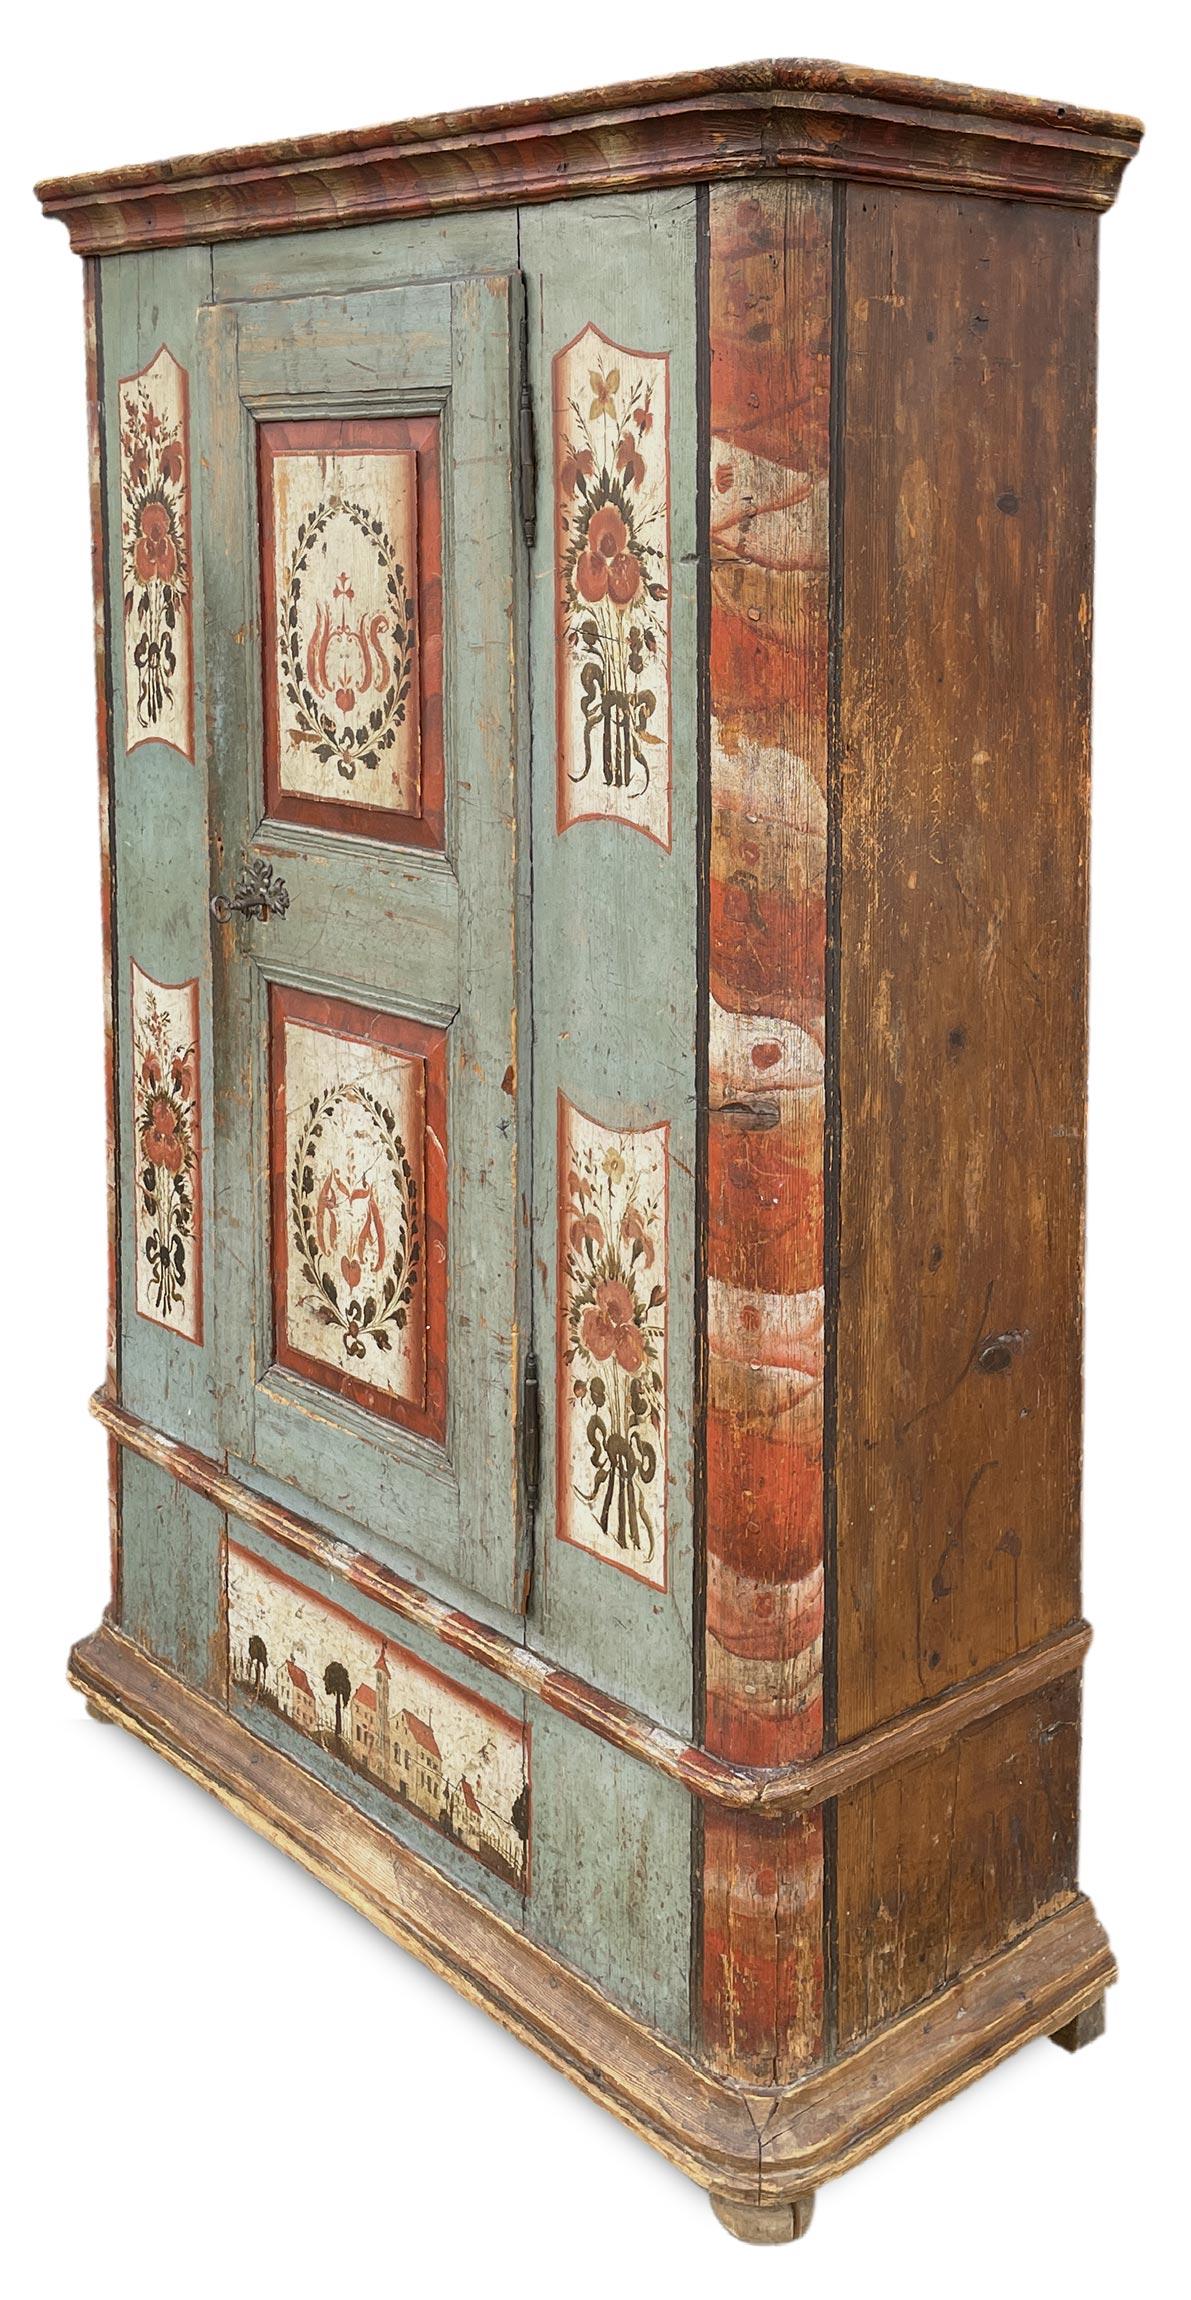 Blue Painted Cabinet Circa 1810 Circa

Measurements: H. 185 cm – L. 120 (129 at the frames) cm – D. 46 (51 at the frames) cm
Period: approximately 1810
Origin: Tyrol
Essence: Fir

Description
Beautiful antique wardrobe entirely painted in light blue